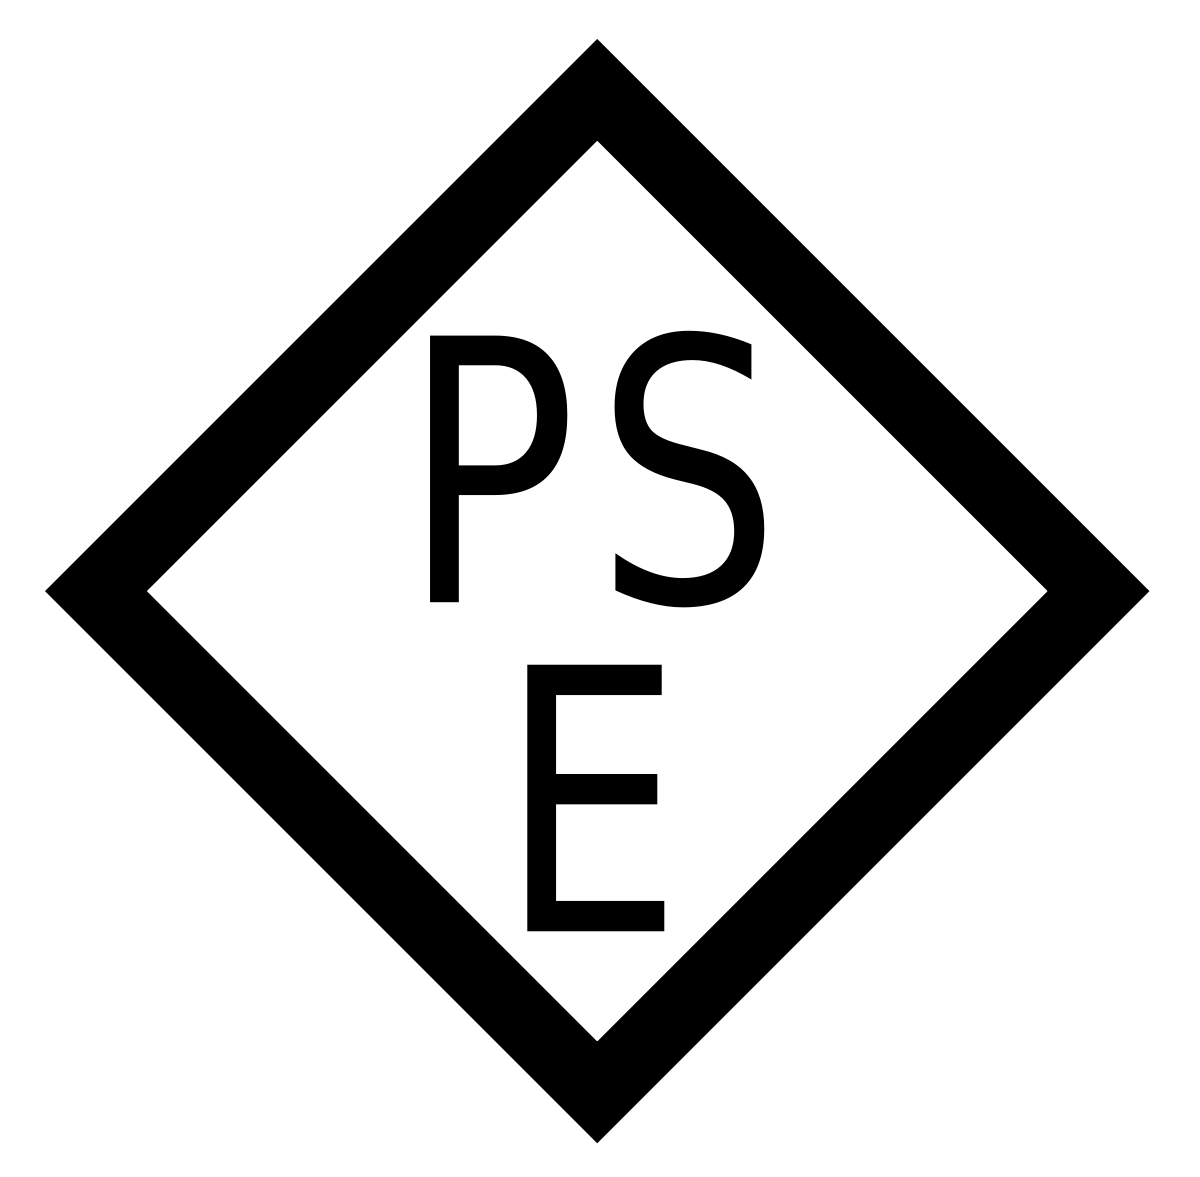 PSE Logo - Act on Product Safety of Electrical Appliances and Materials